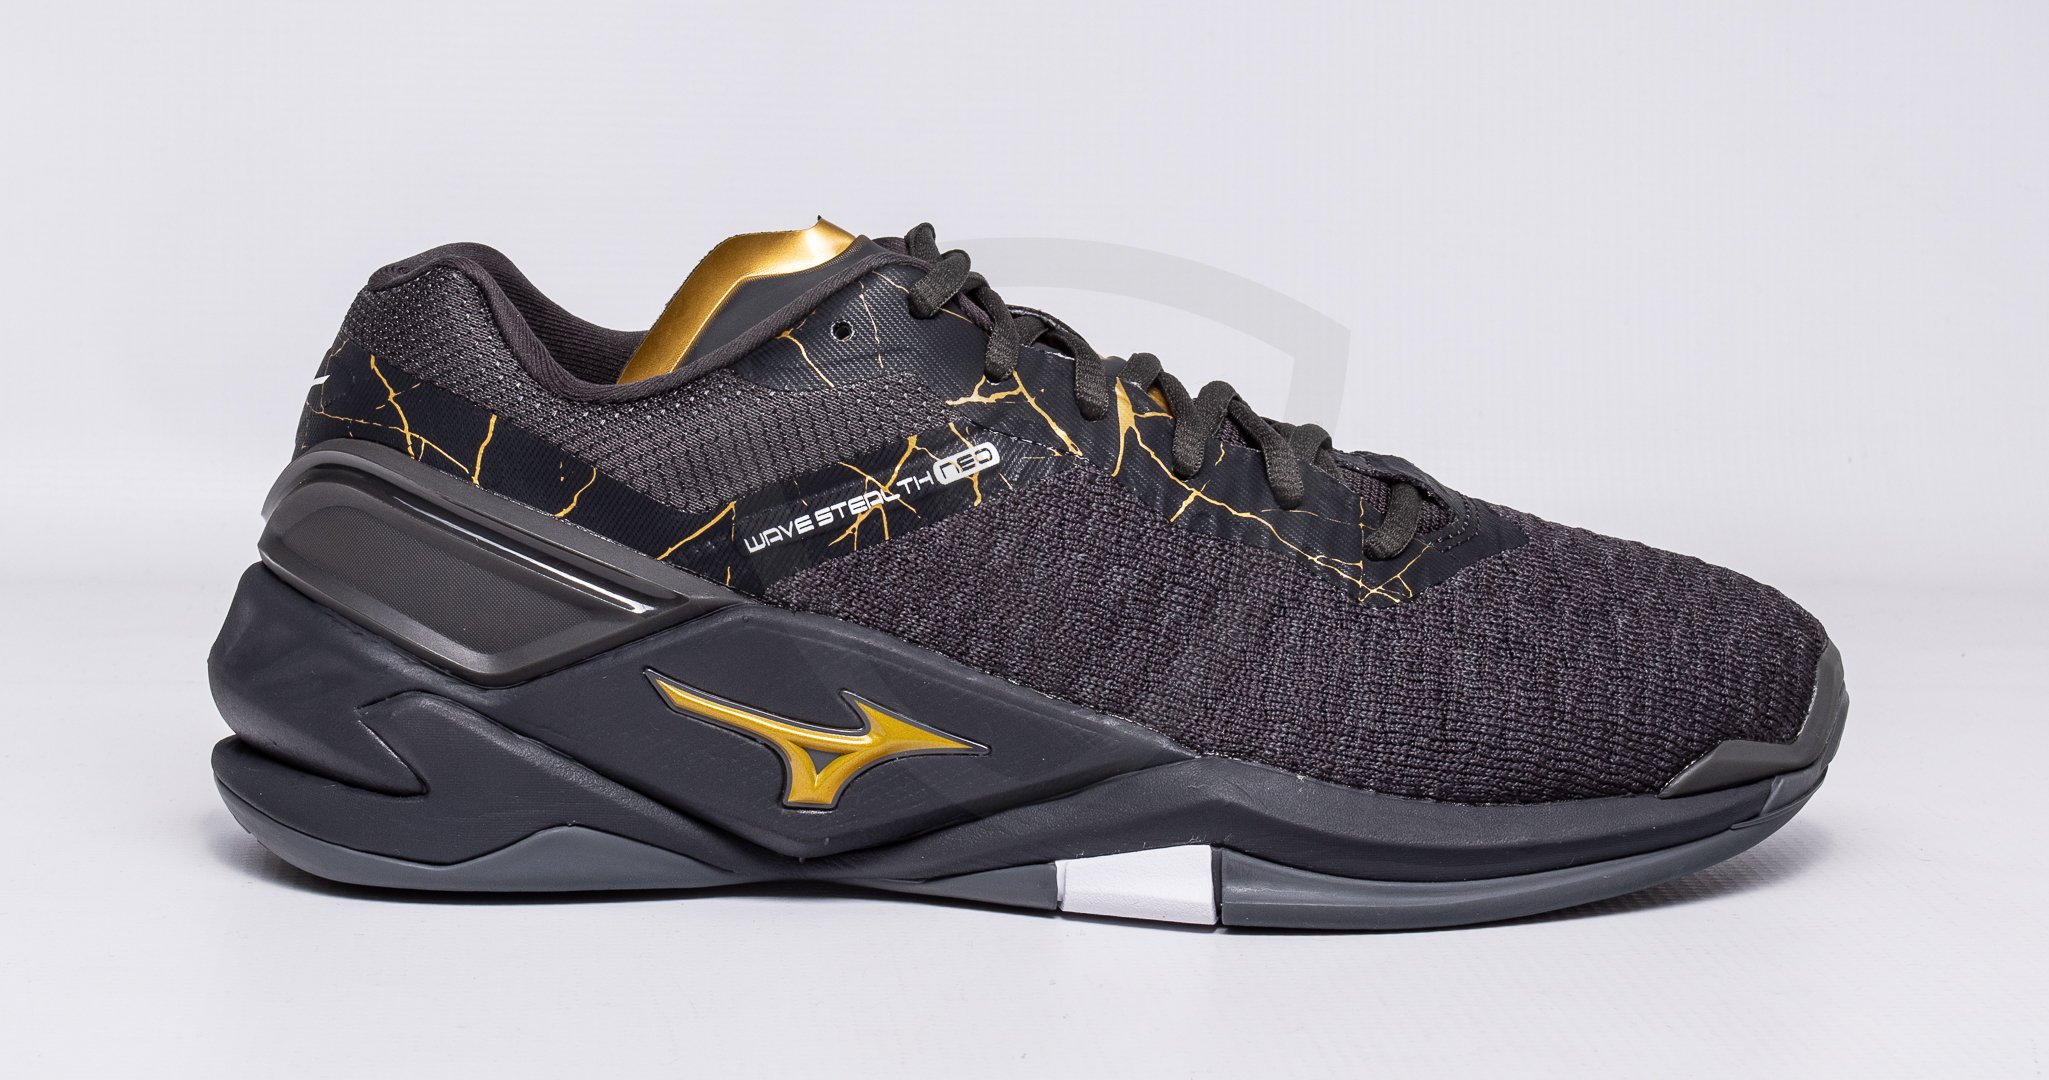 Mizuno WAVE STEALTH NEO BlkOyster-MPGold-IronGat UK 10 / US 11 / EUR 44,5 / CM 29